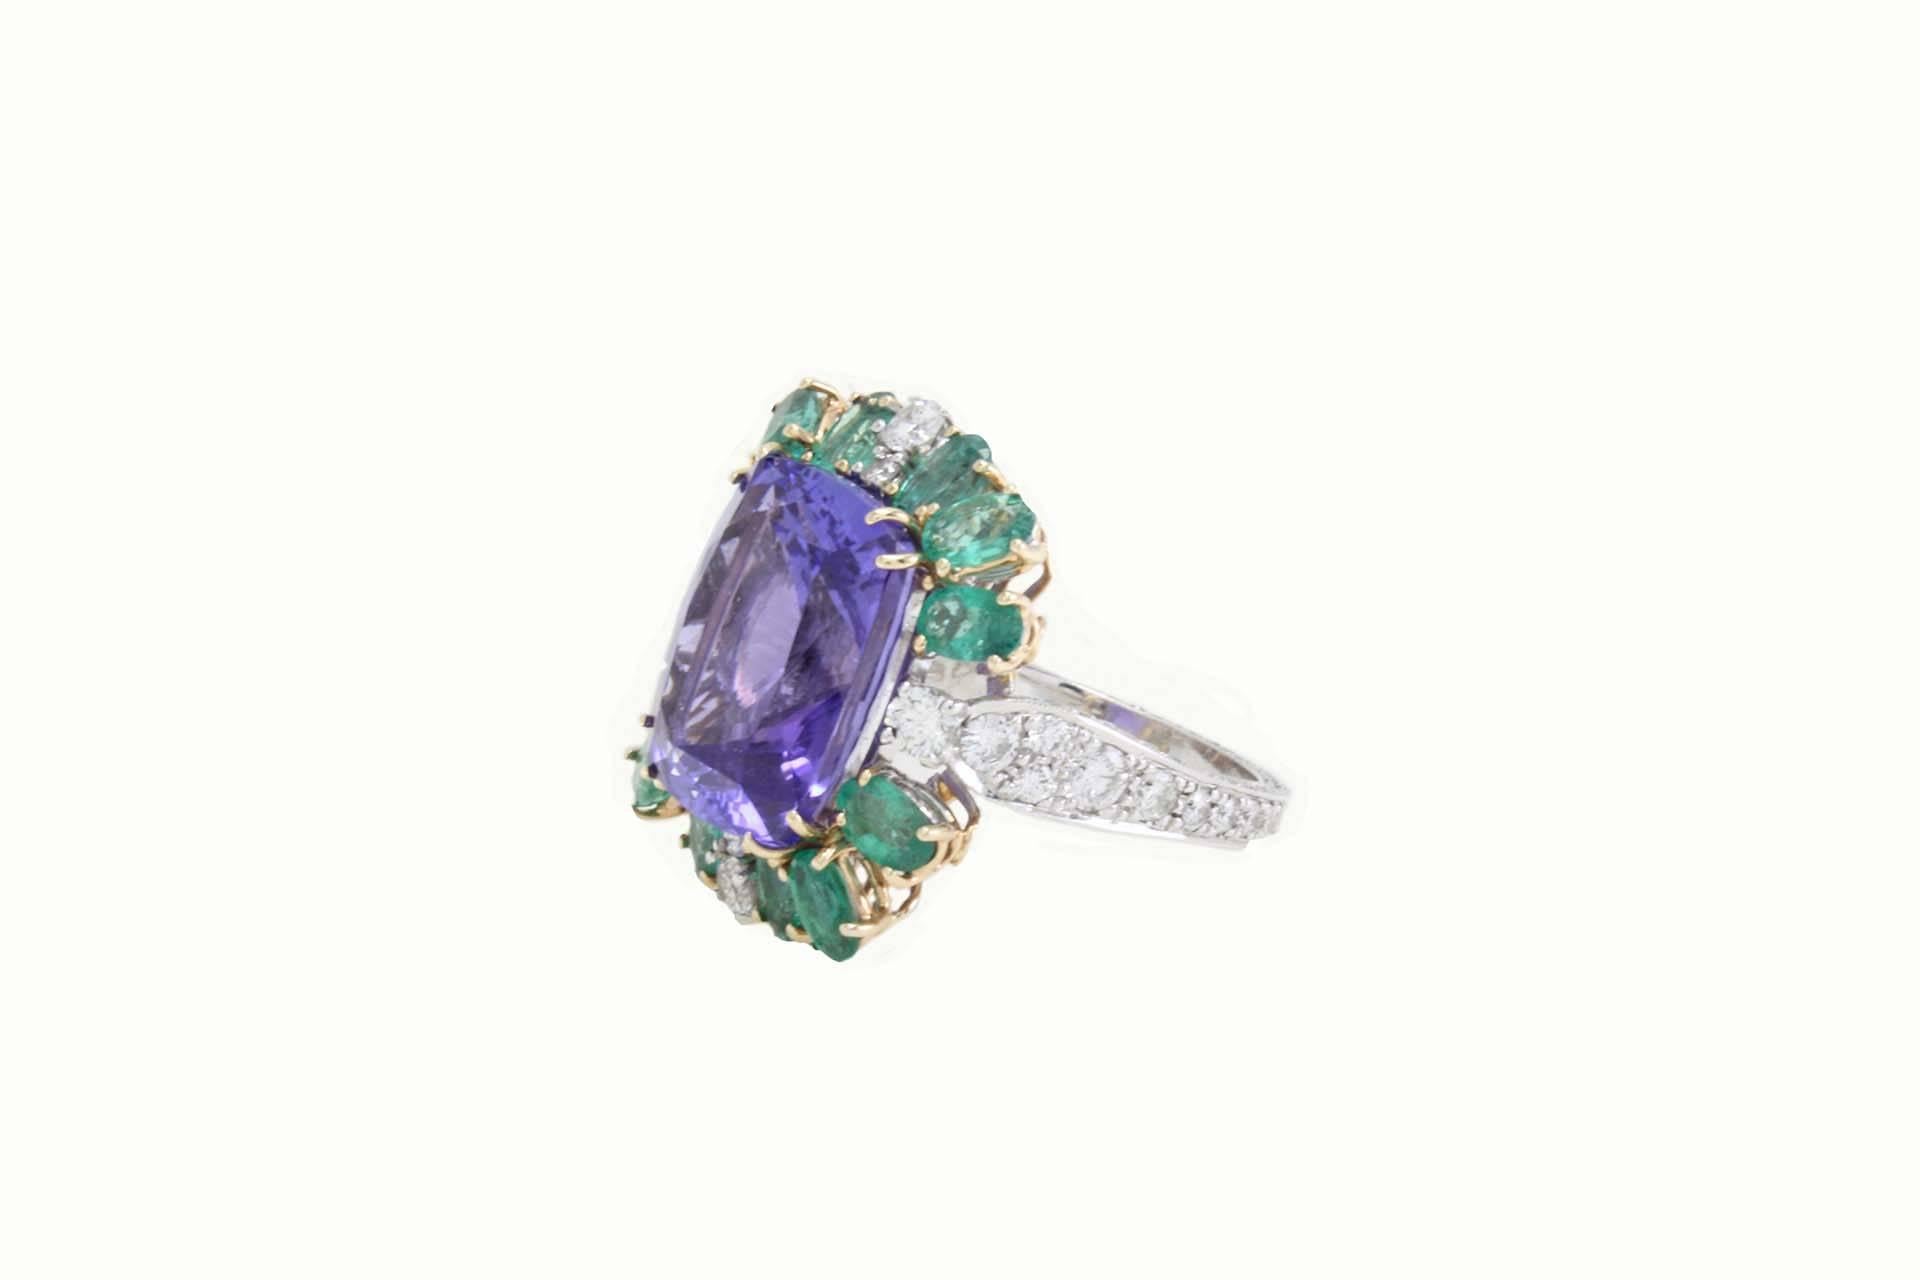 SHIPPING POLICY:
No additional costs will be added to this order.
Shipping costs will be totally covered by the seller (customs duties included).

Sparkling ring in 14Kt gold composed of a square shaped blue tanzanite surrounded by emeralds and